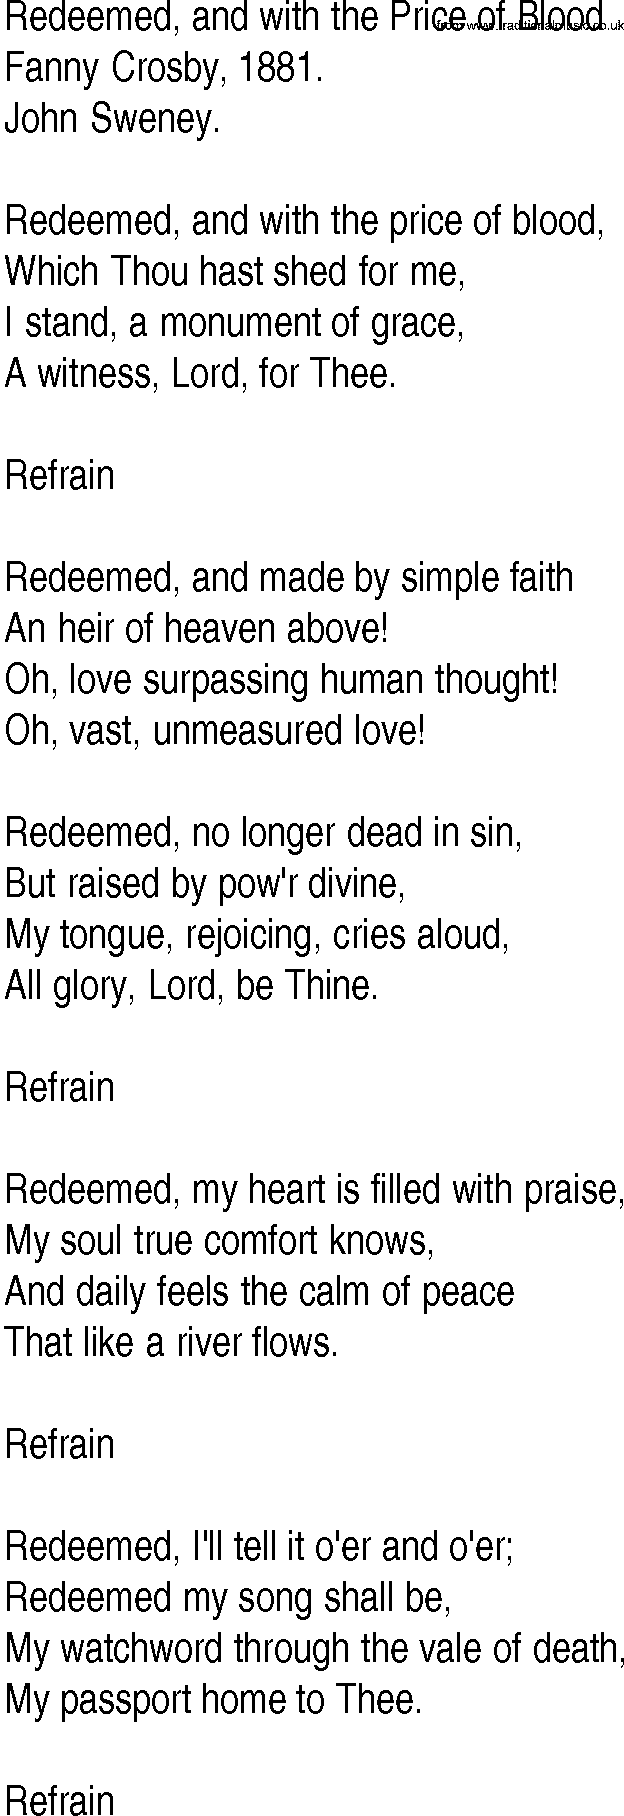 Hymn and Gospel Song: Redeemed, and with the Price of Blood by Fanny Crosby lyrics